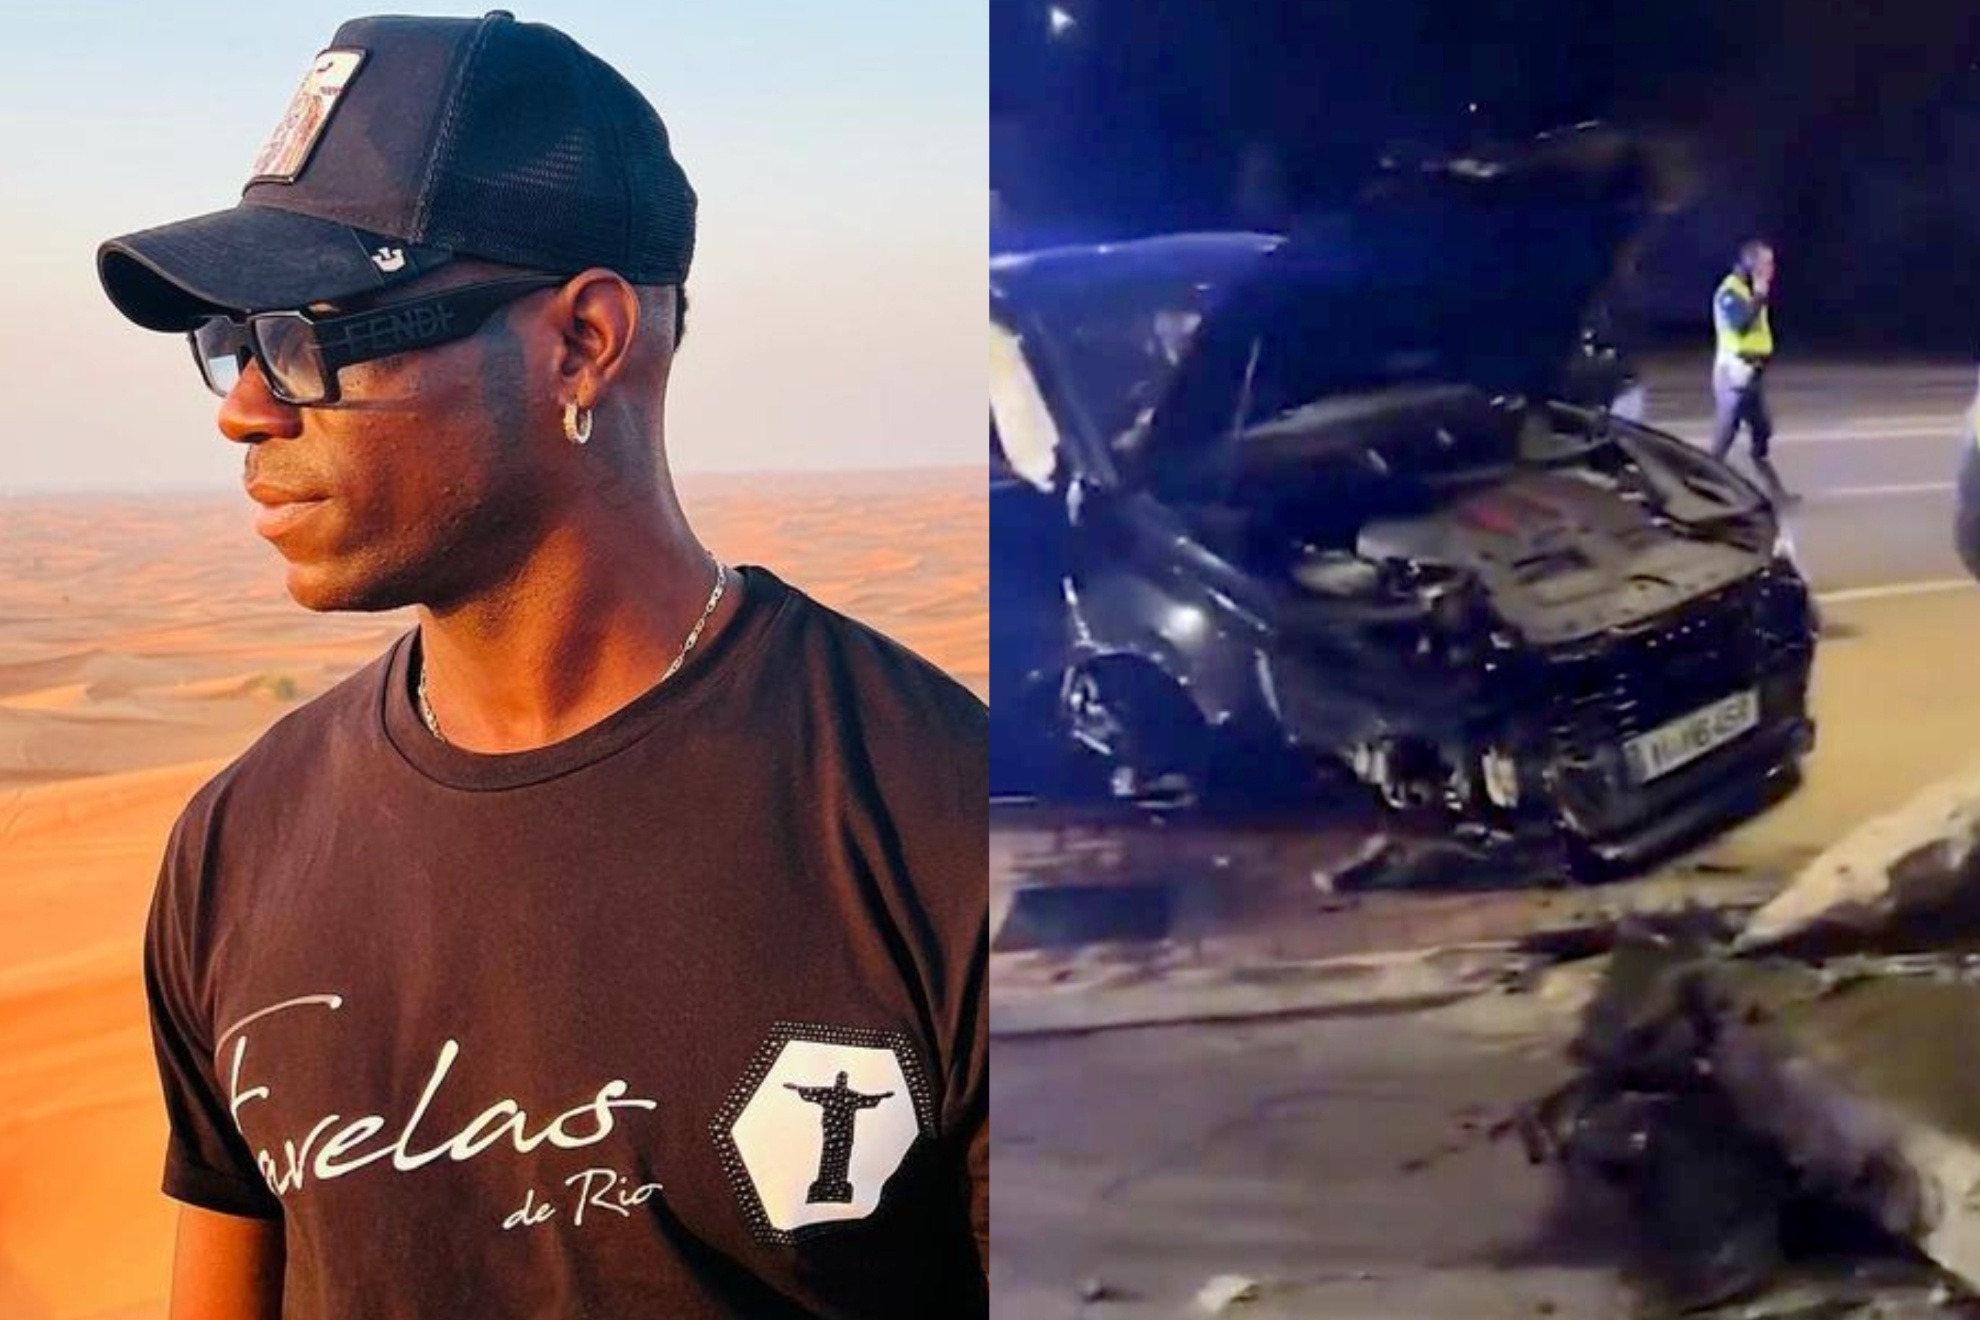 Mario Balotelli was involved in a car accident on Thursday night